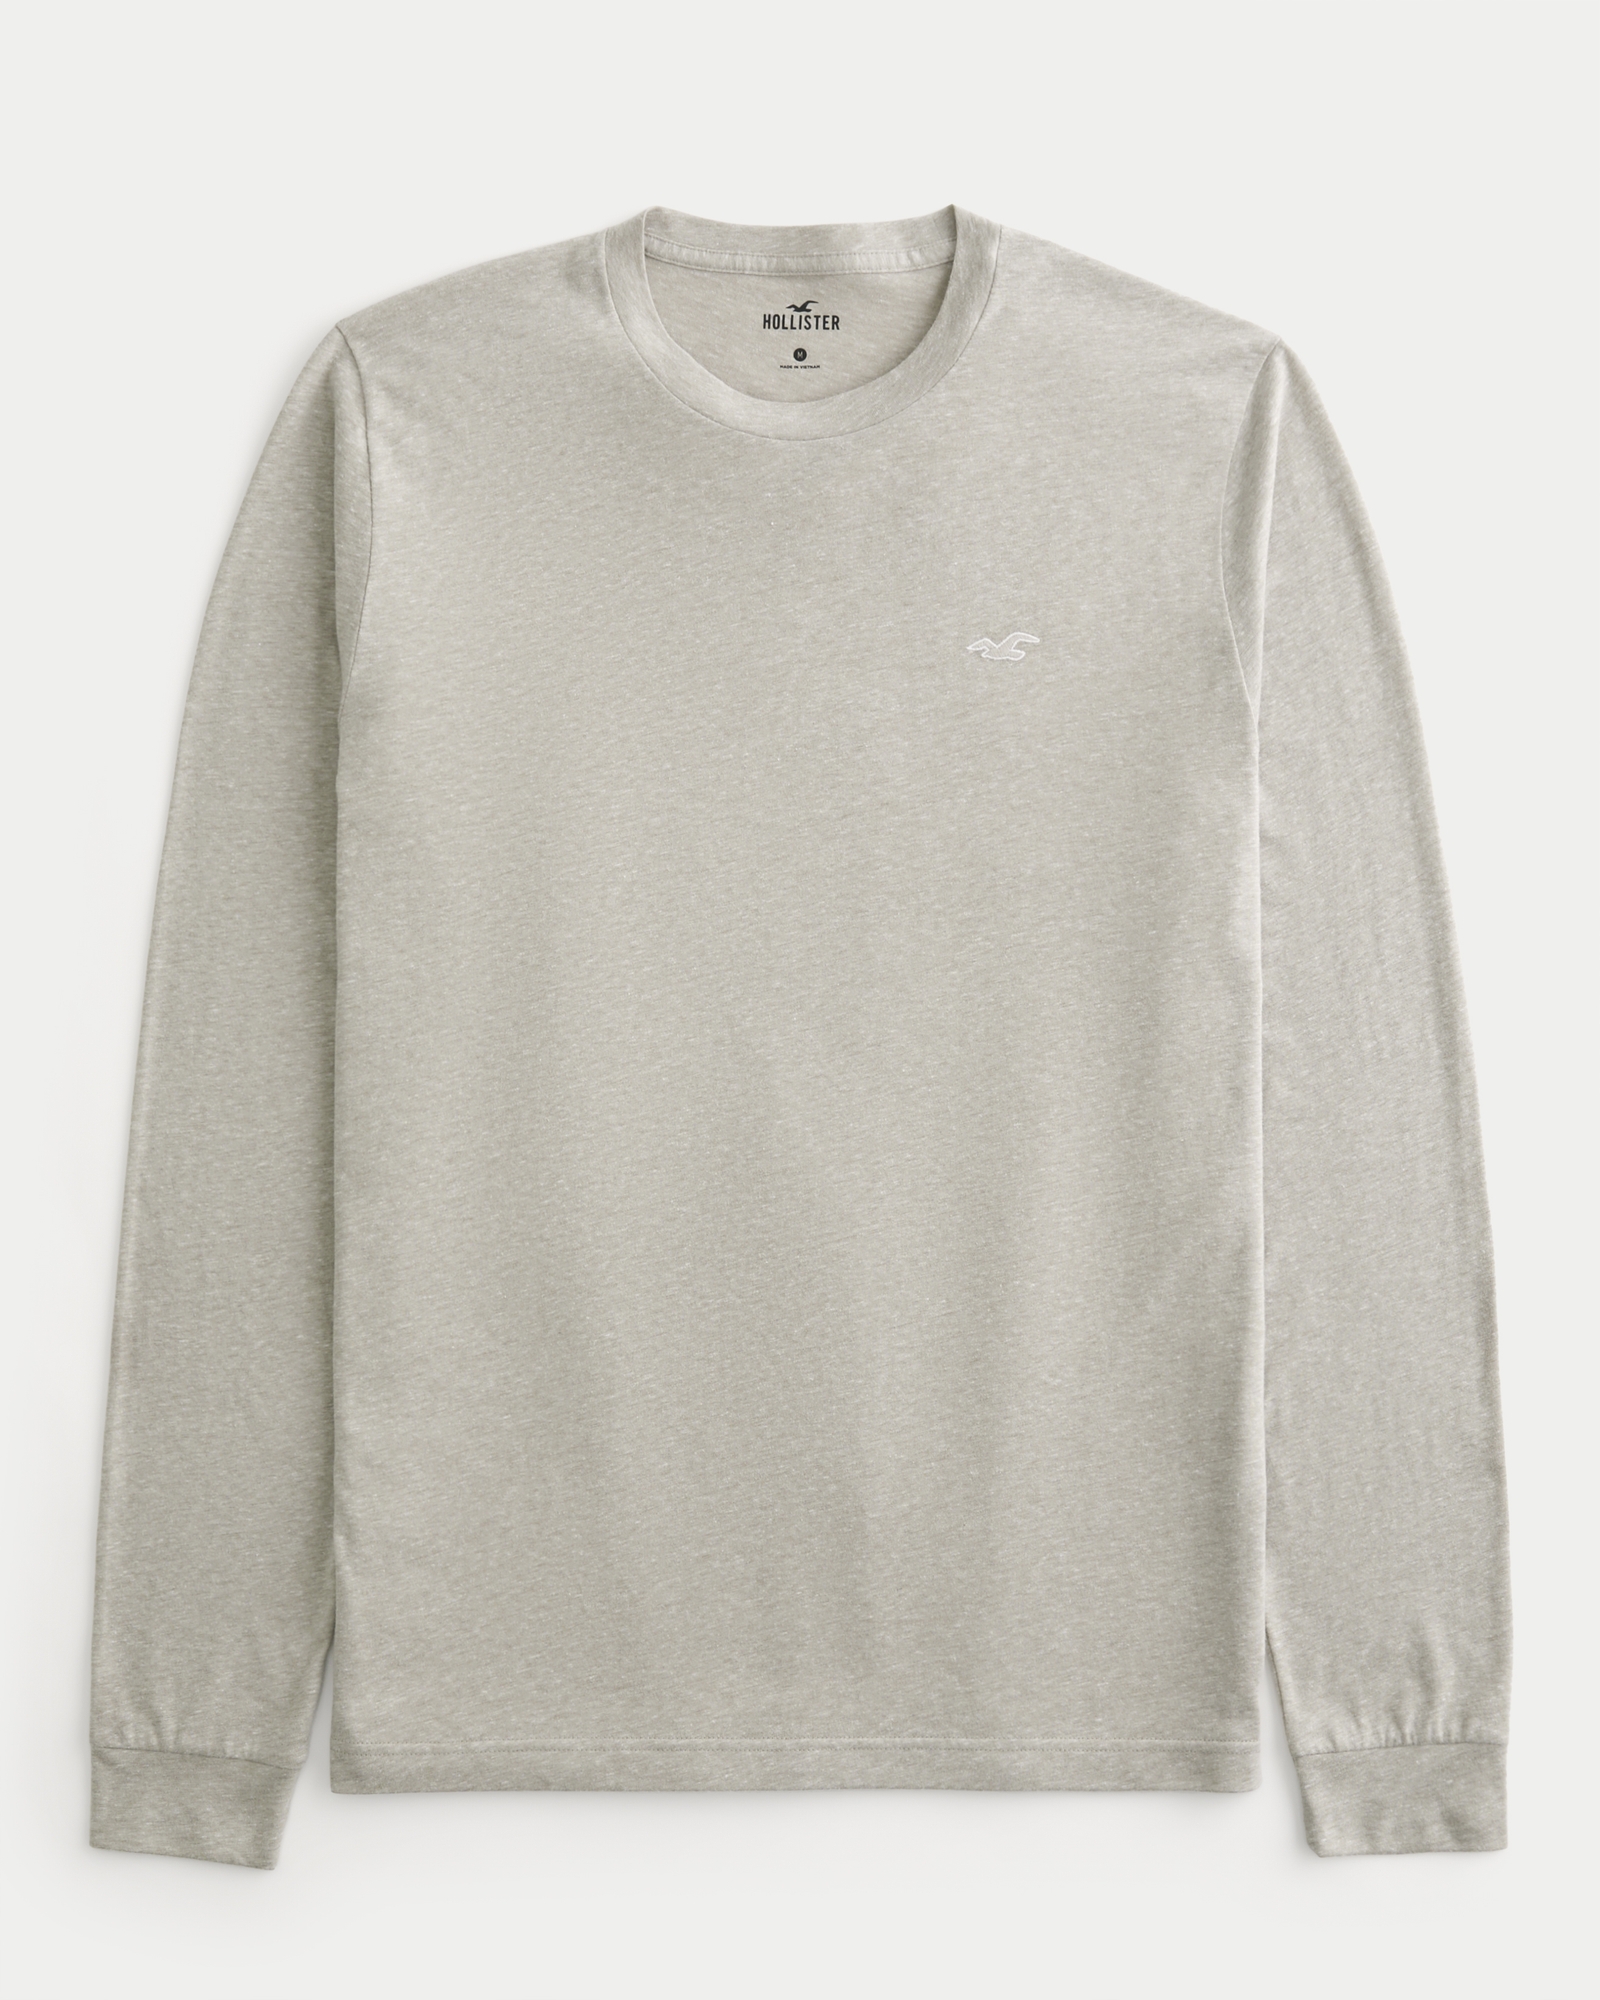 Hollister Long Sleeve T-Shirt XS - Classic Style and Comfort in 100%  Cotton!, in Bournemouth, Dorset